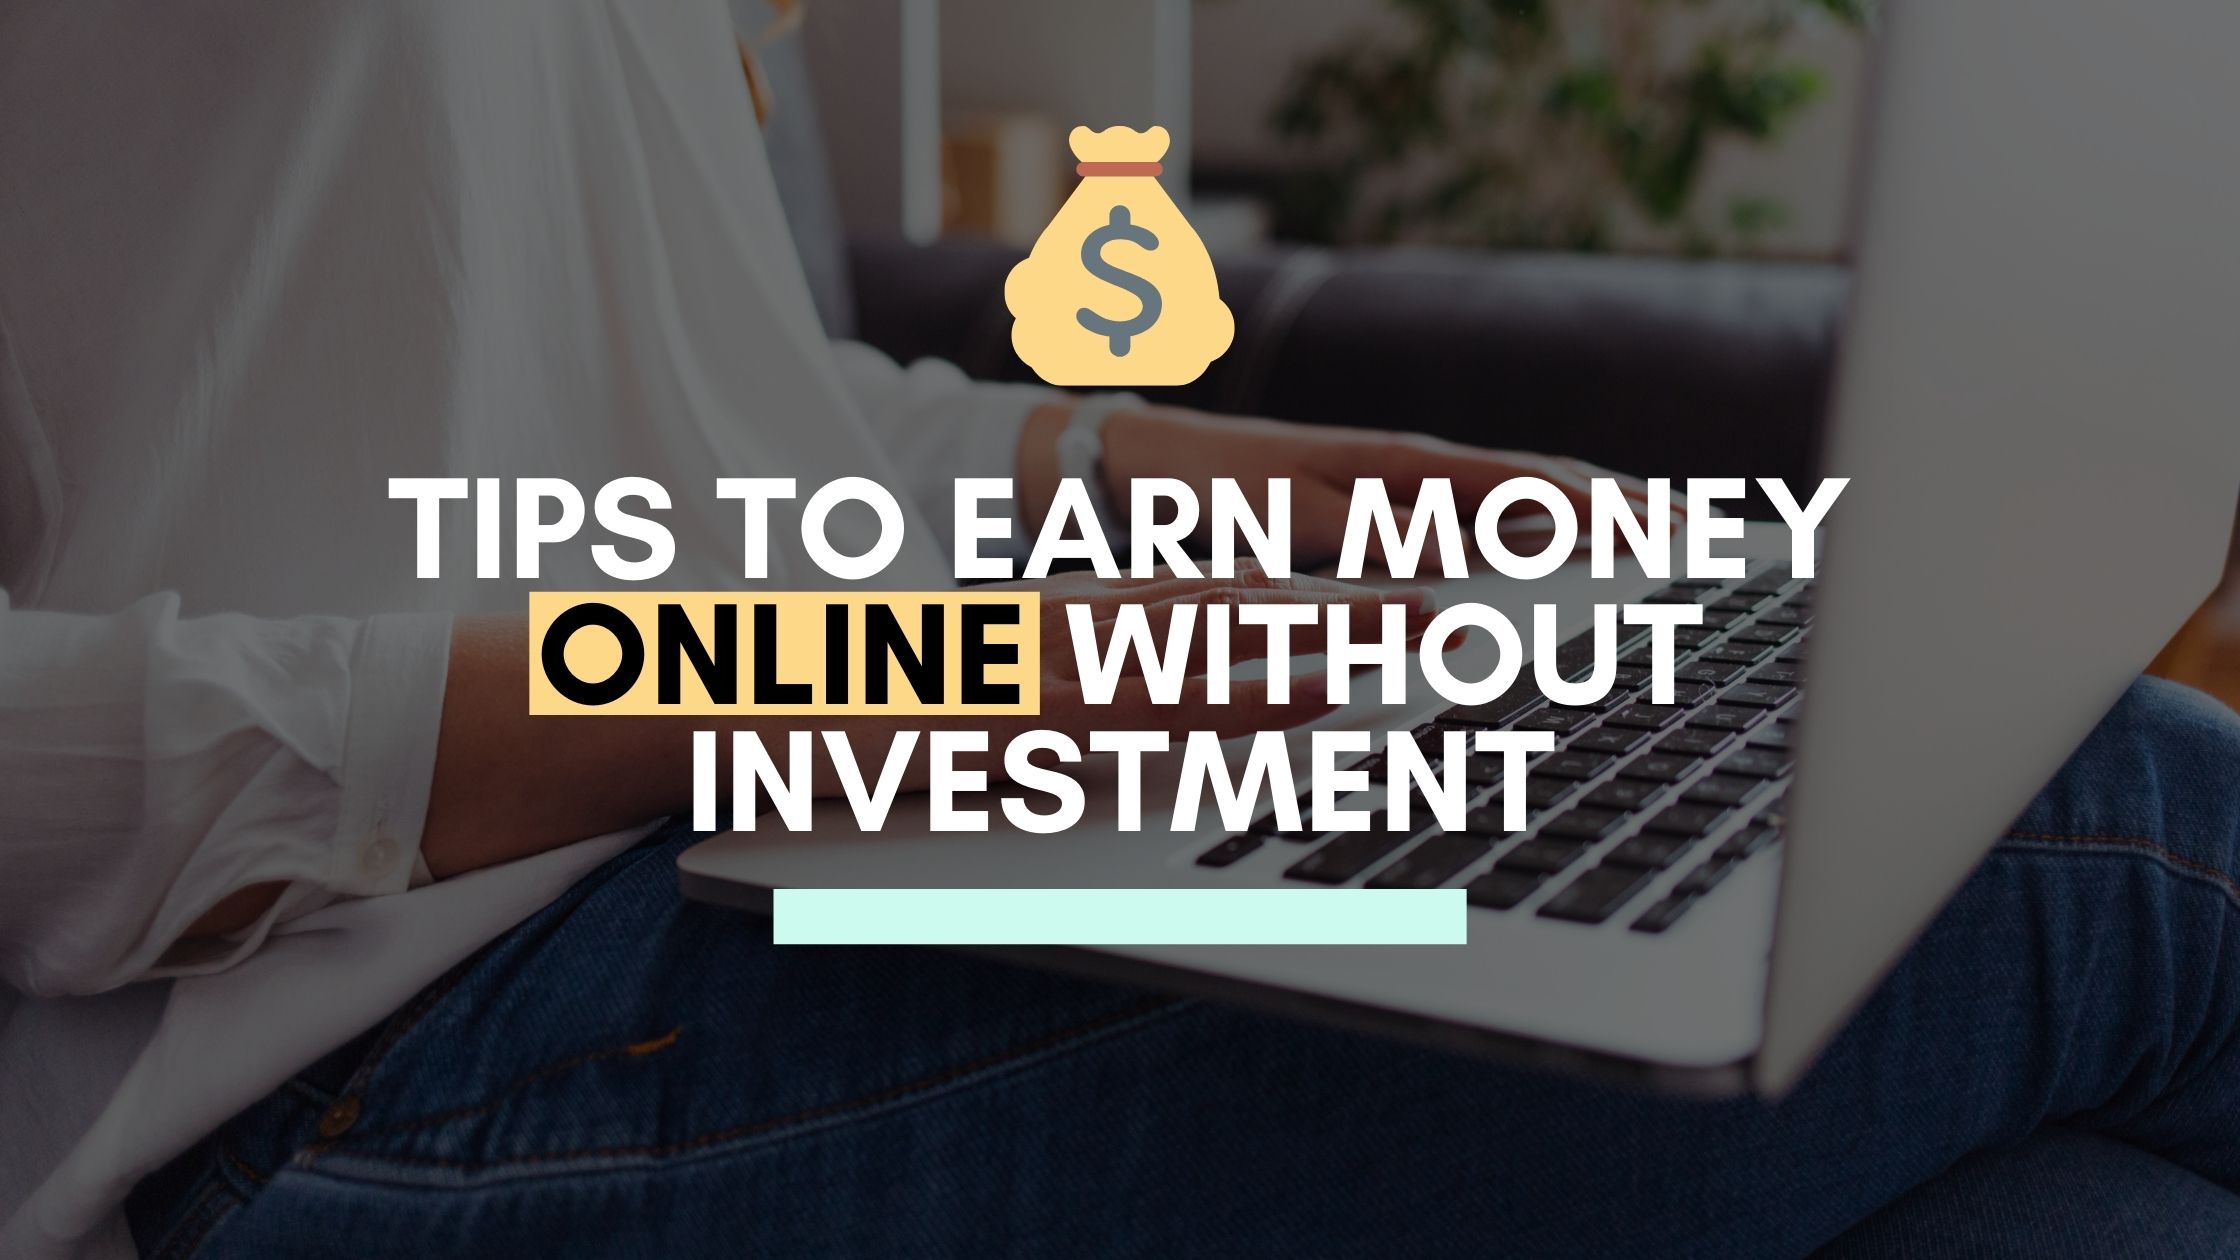 How to Make Money Online Without Investment for Students 